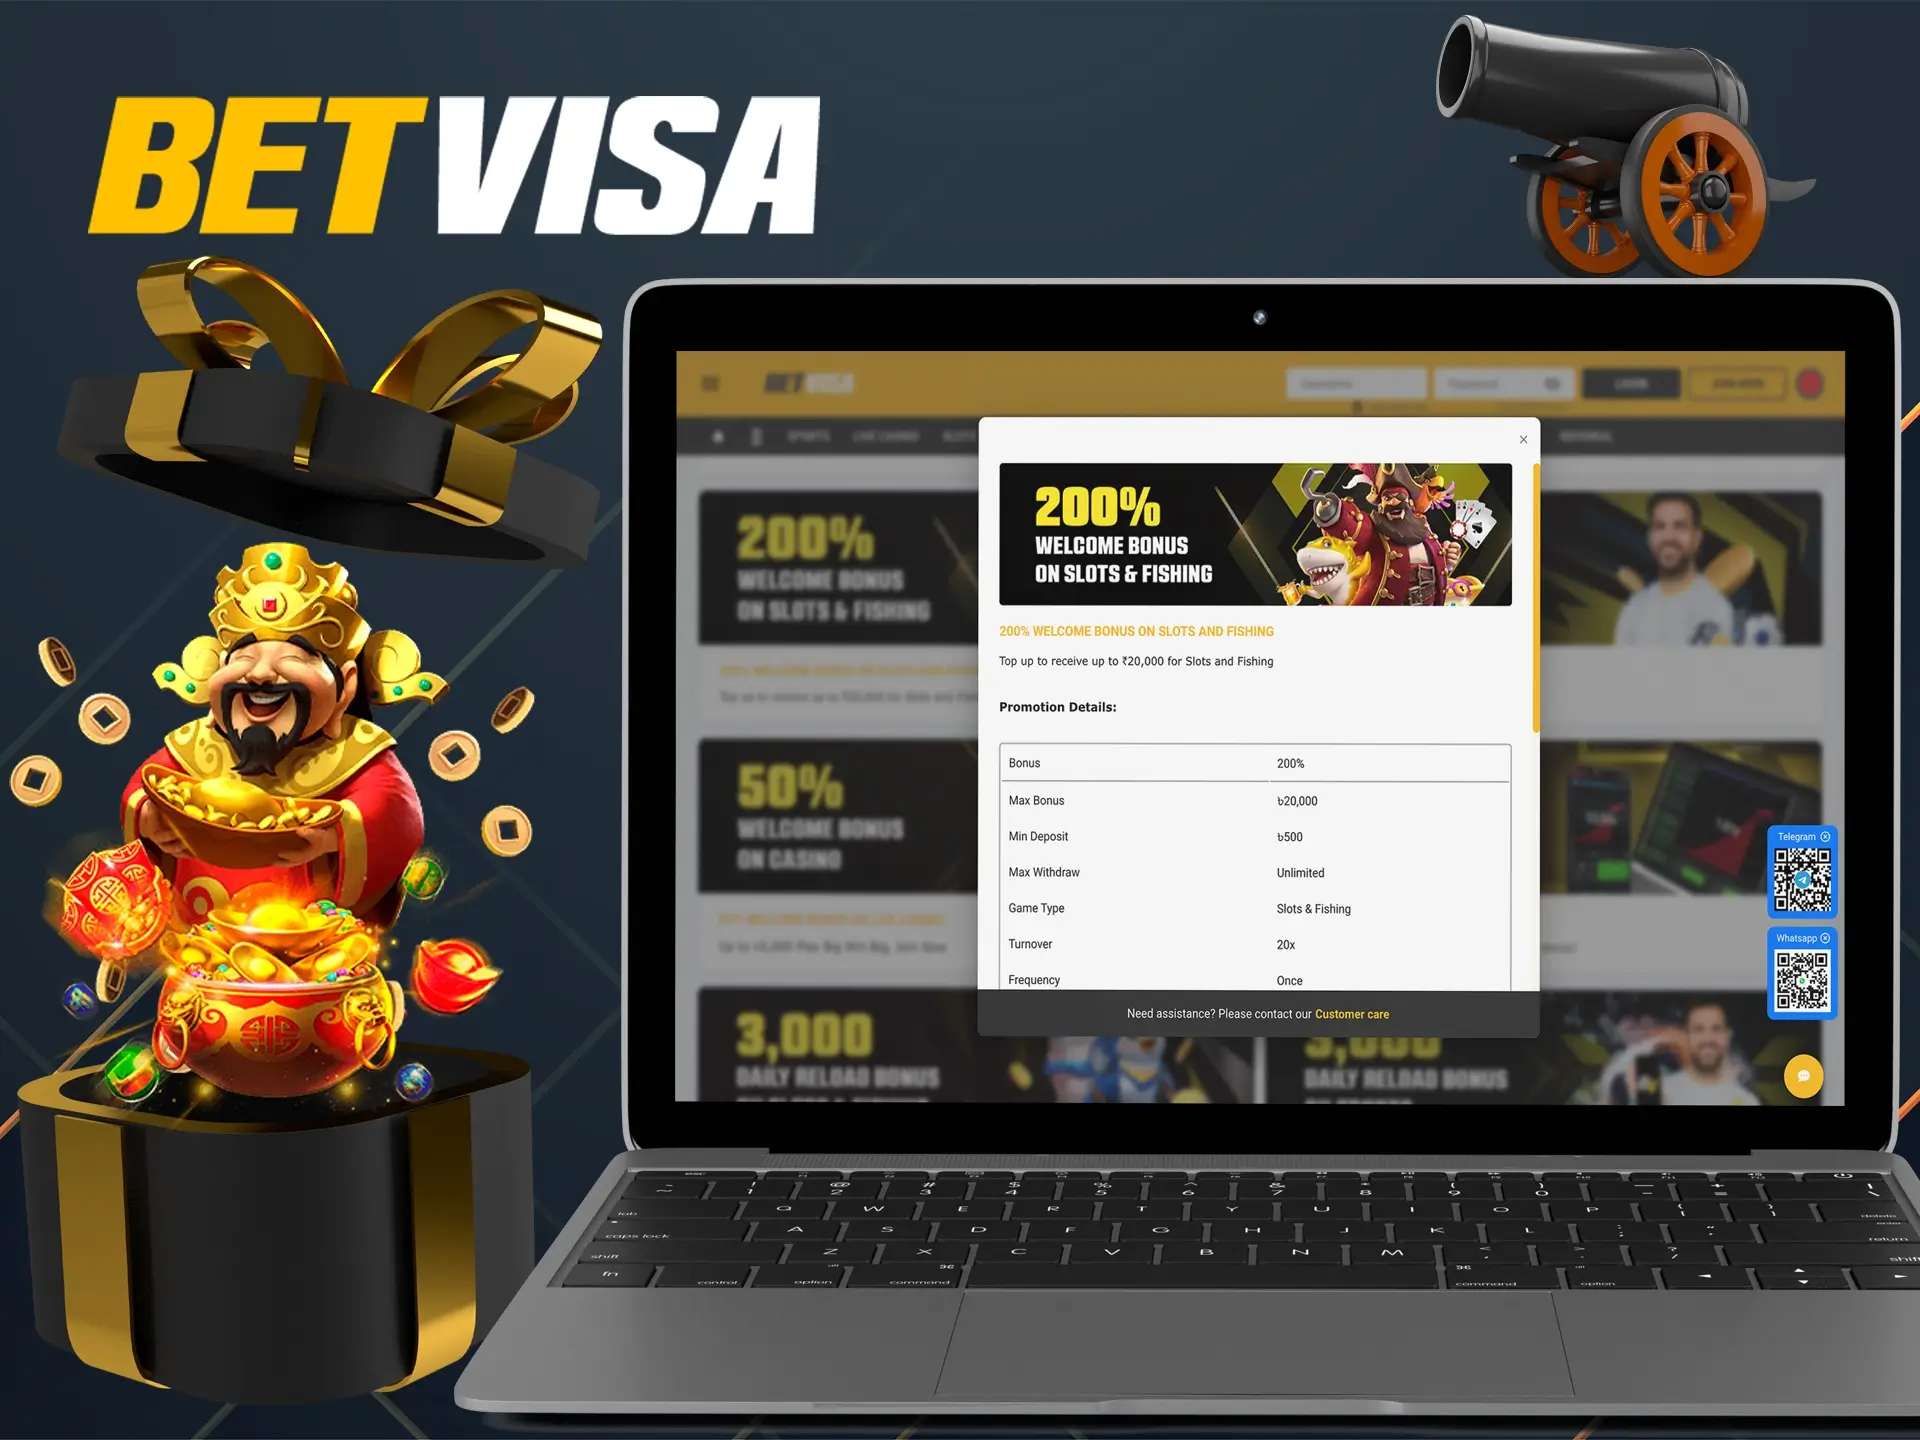 Play fishing and slots and Betvisa will take care of the rest.